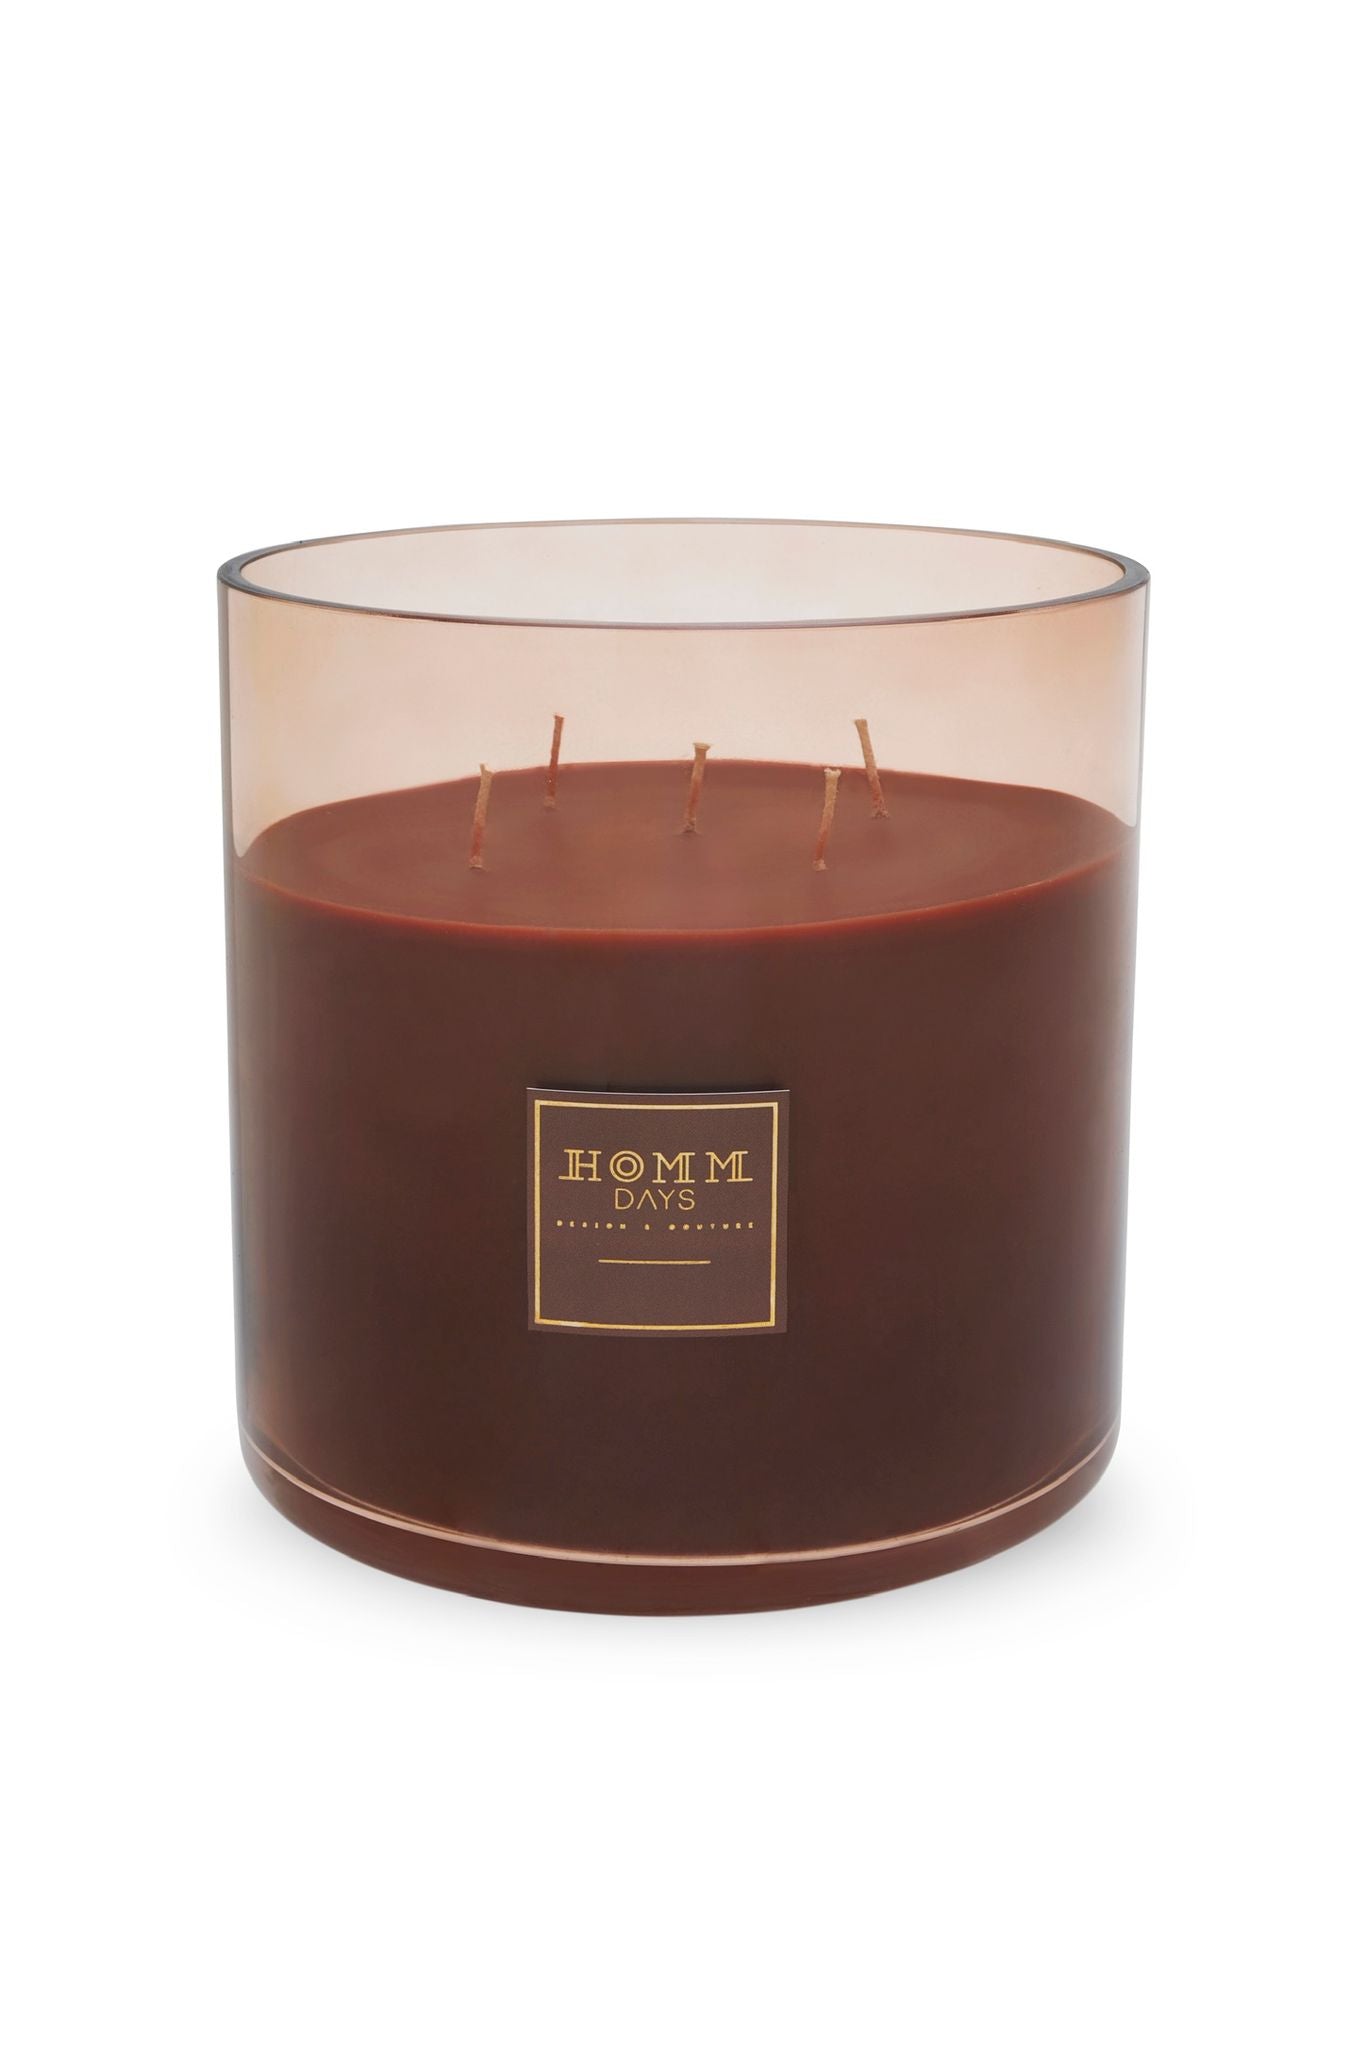 HOMM DAYS Candle